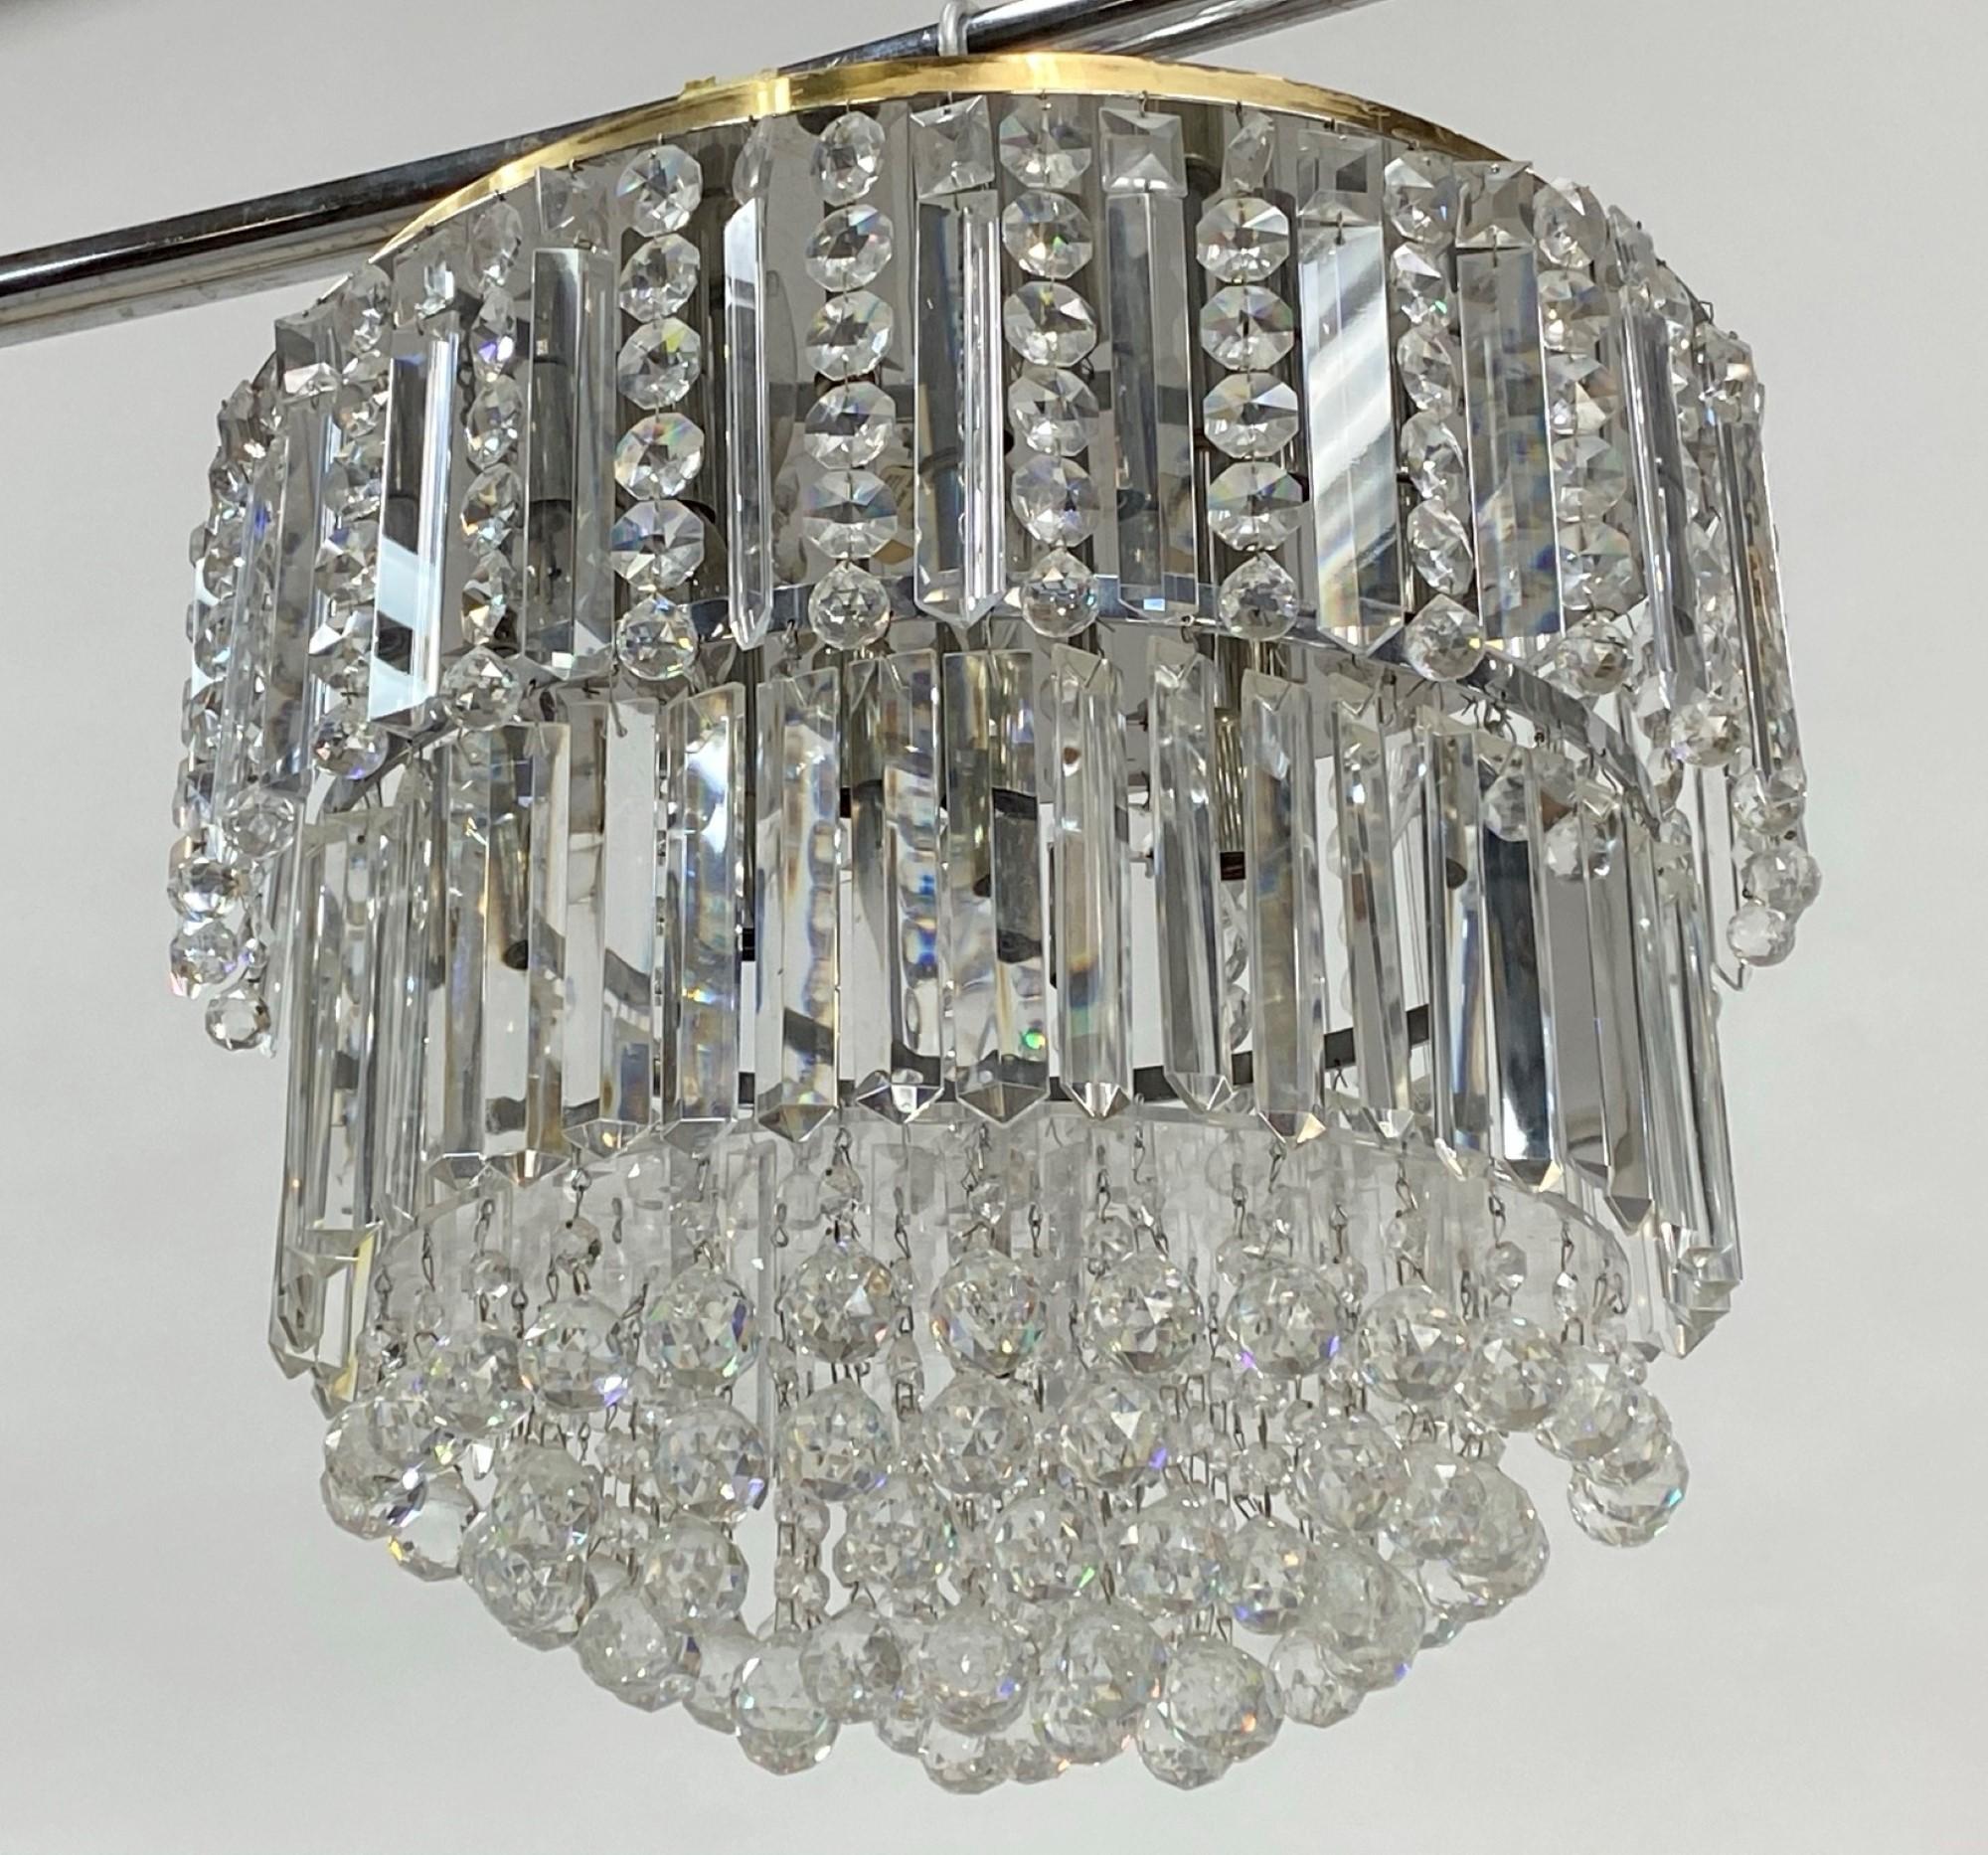 Polished Mid-Century Modern Flush Mount Crystal Chandelier from Beverly Hills